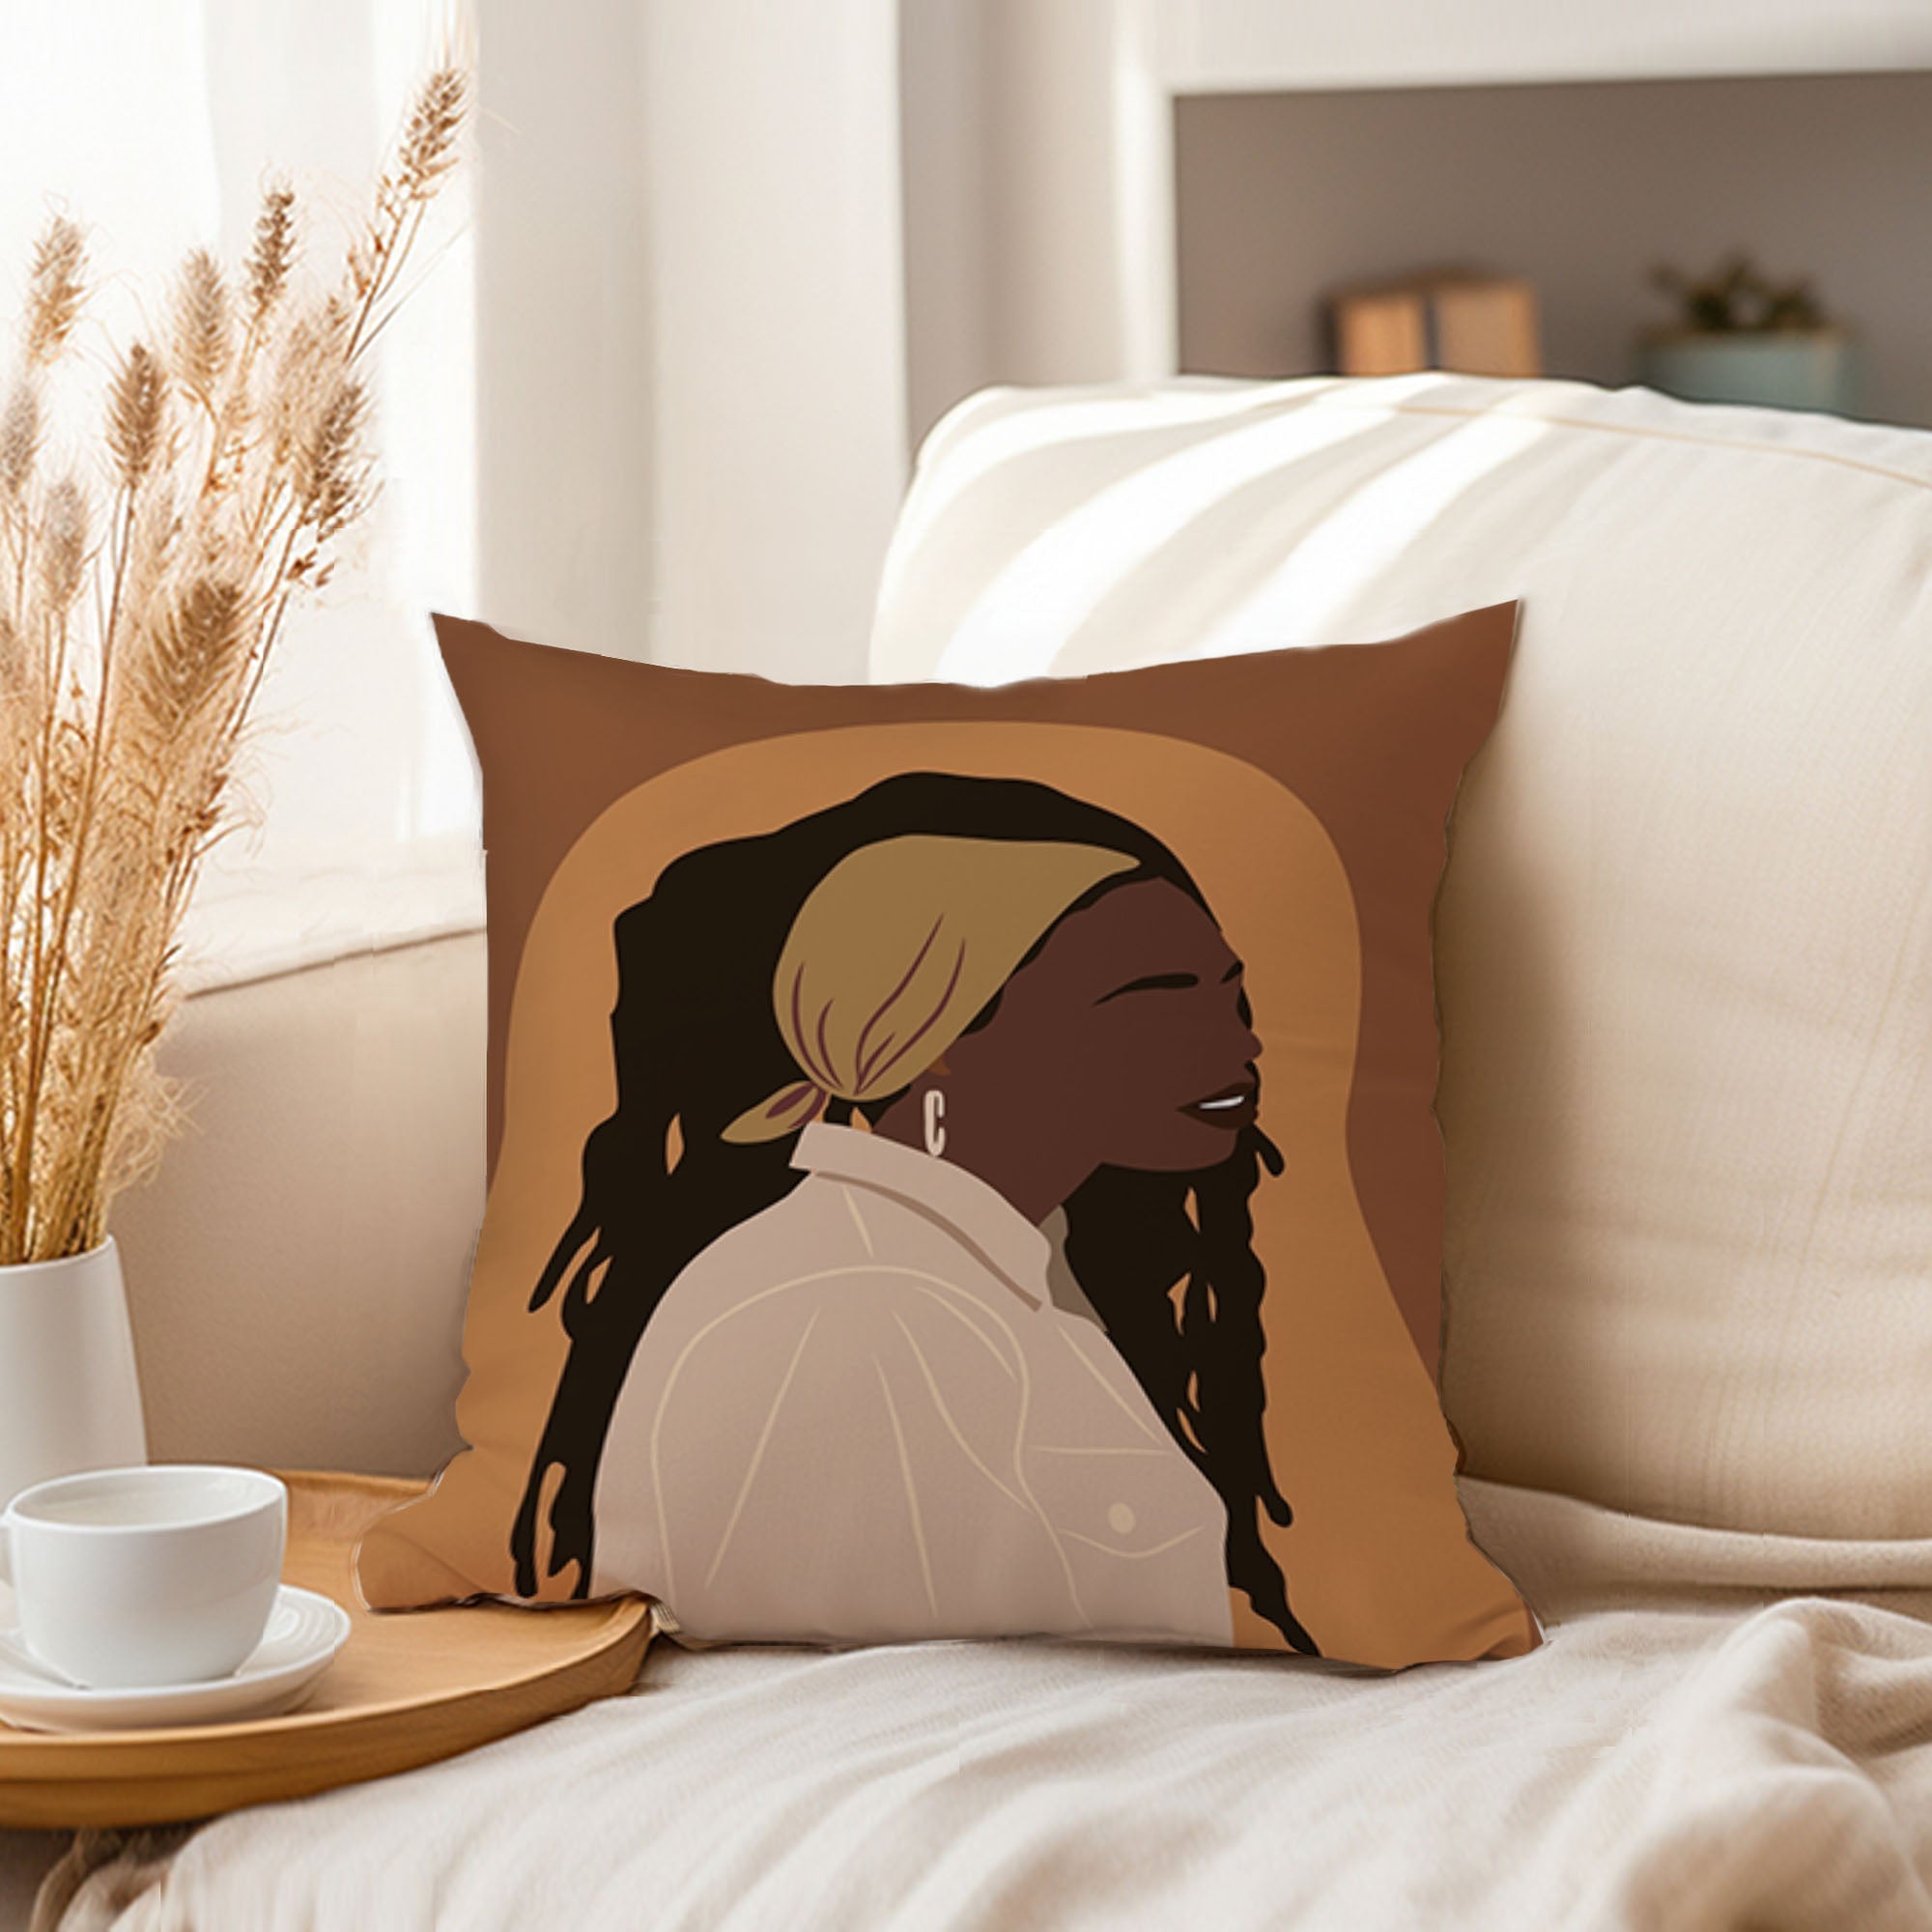 Ethan Taylor People and Portraits Throw Pillow Soft Cushion Cover 'African American Woman Portrait Portraits Female' Bohemian Pattern Decorative Square Accent Pillow Case, 16x16 Inches, Brown, Orange - image 3 of 5